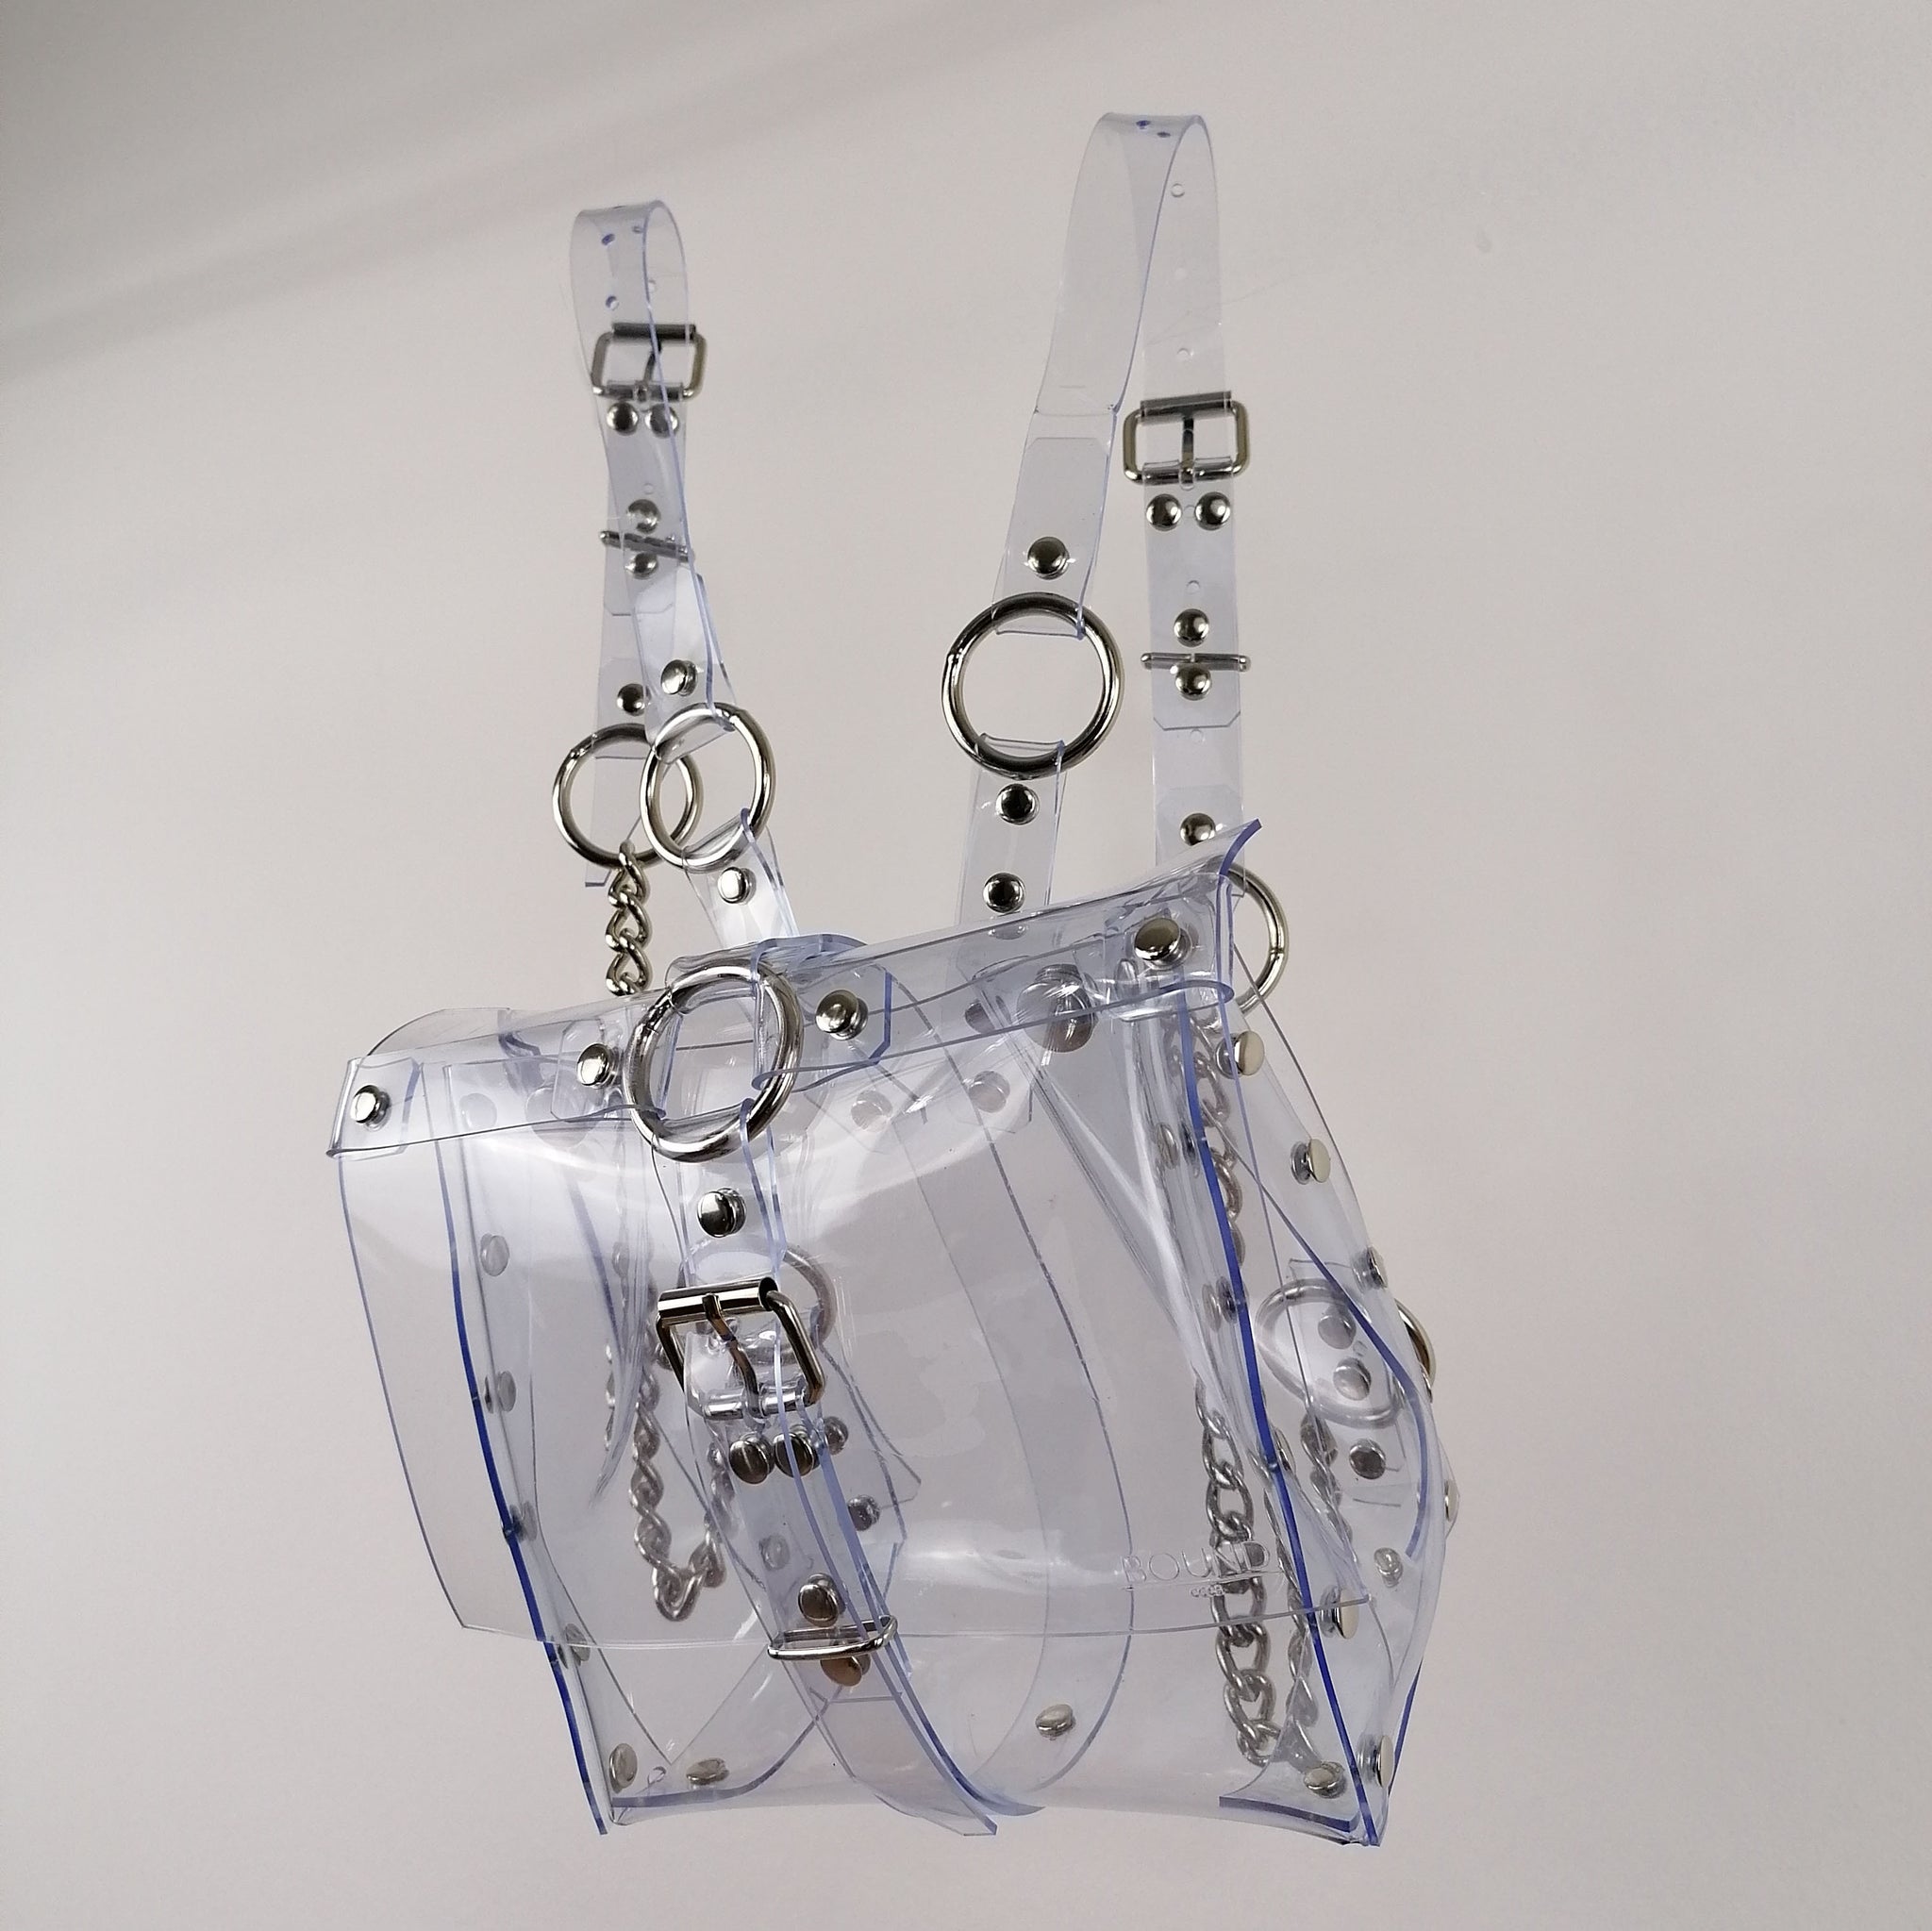 'ALJA' clear PVC backpack with chains and cross detail